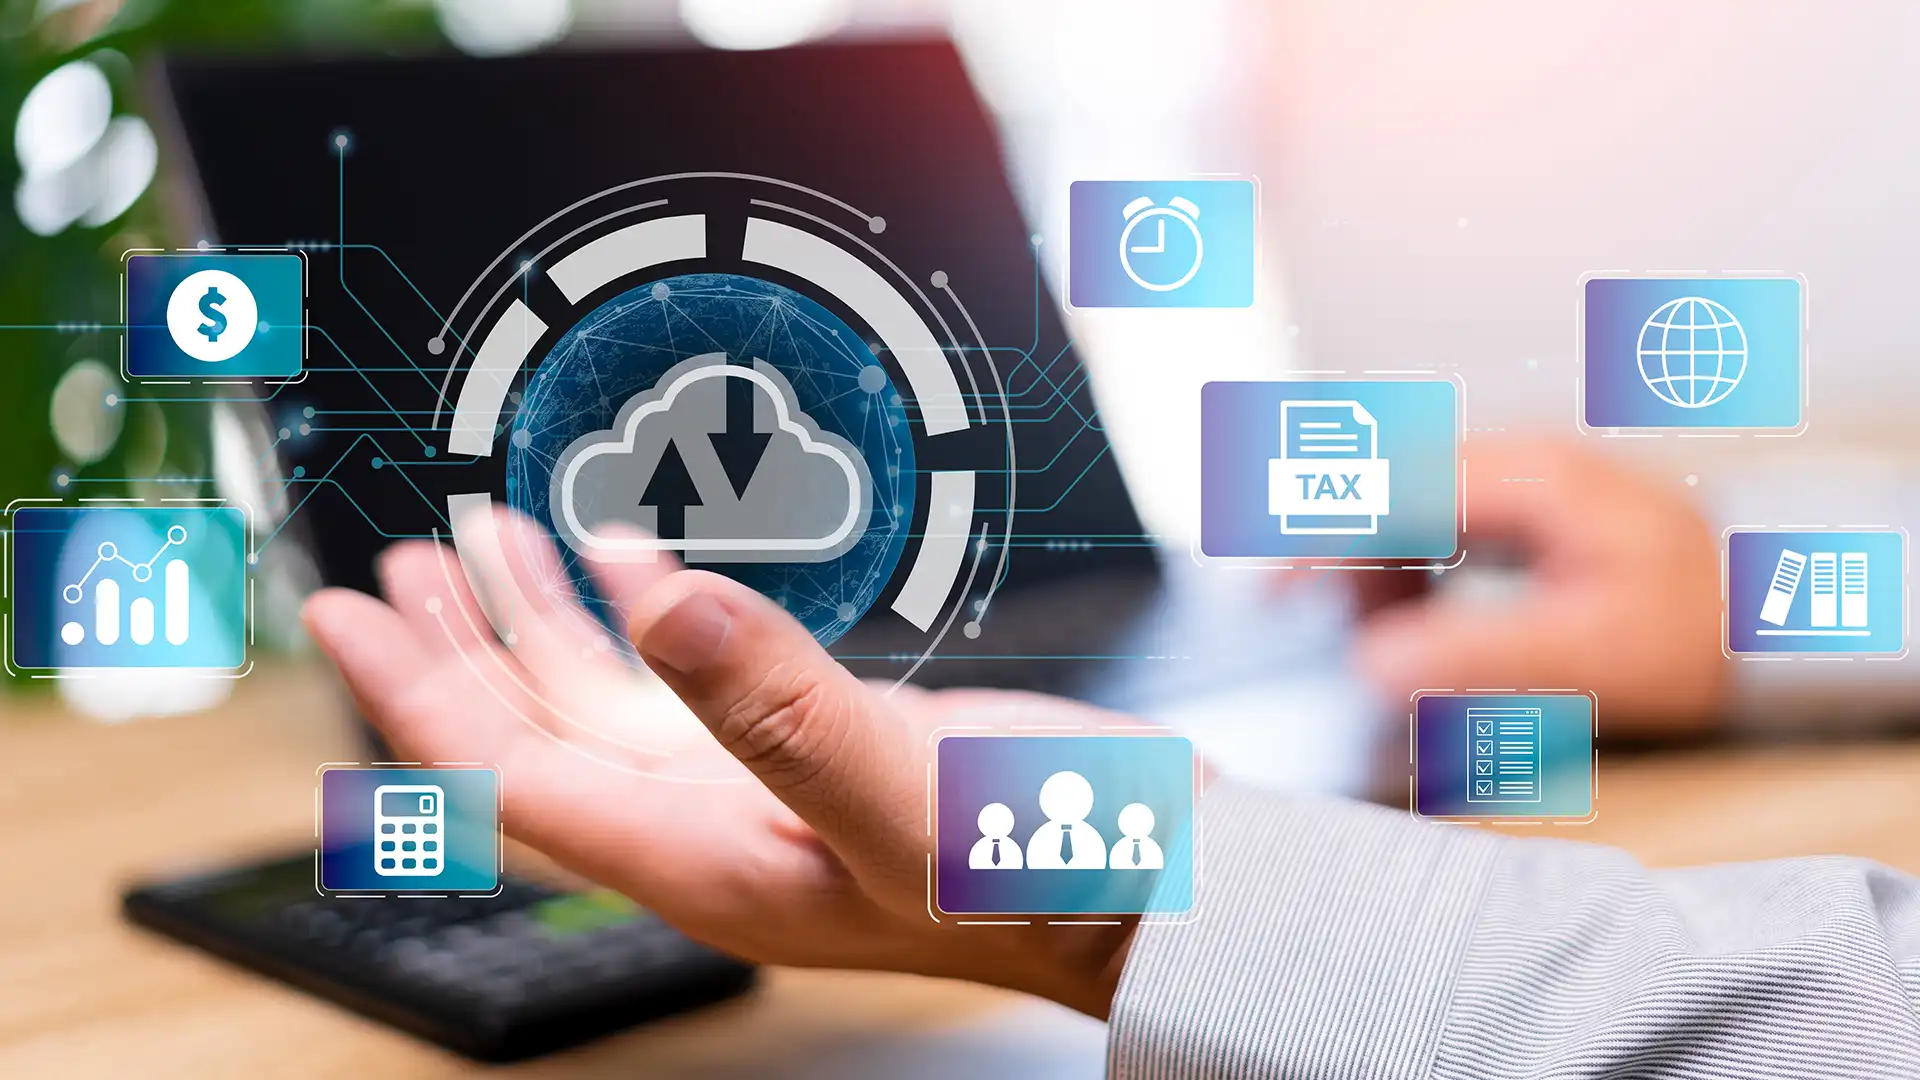 Business professional interacting with a futuristic digital interface showcasing cloud expense management icons, including cloud storage, financial analytics, and data security, highlighting Prudent's innovative solutions for managing cloud costs efficiently